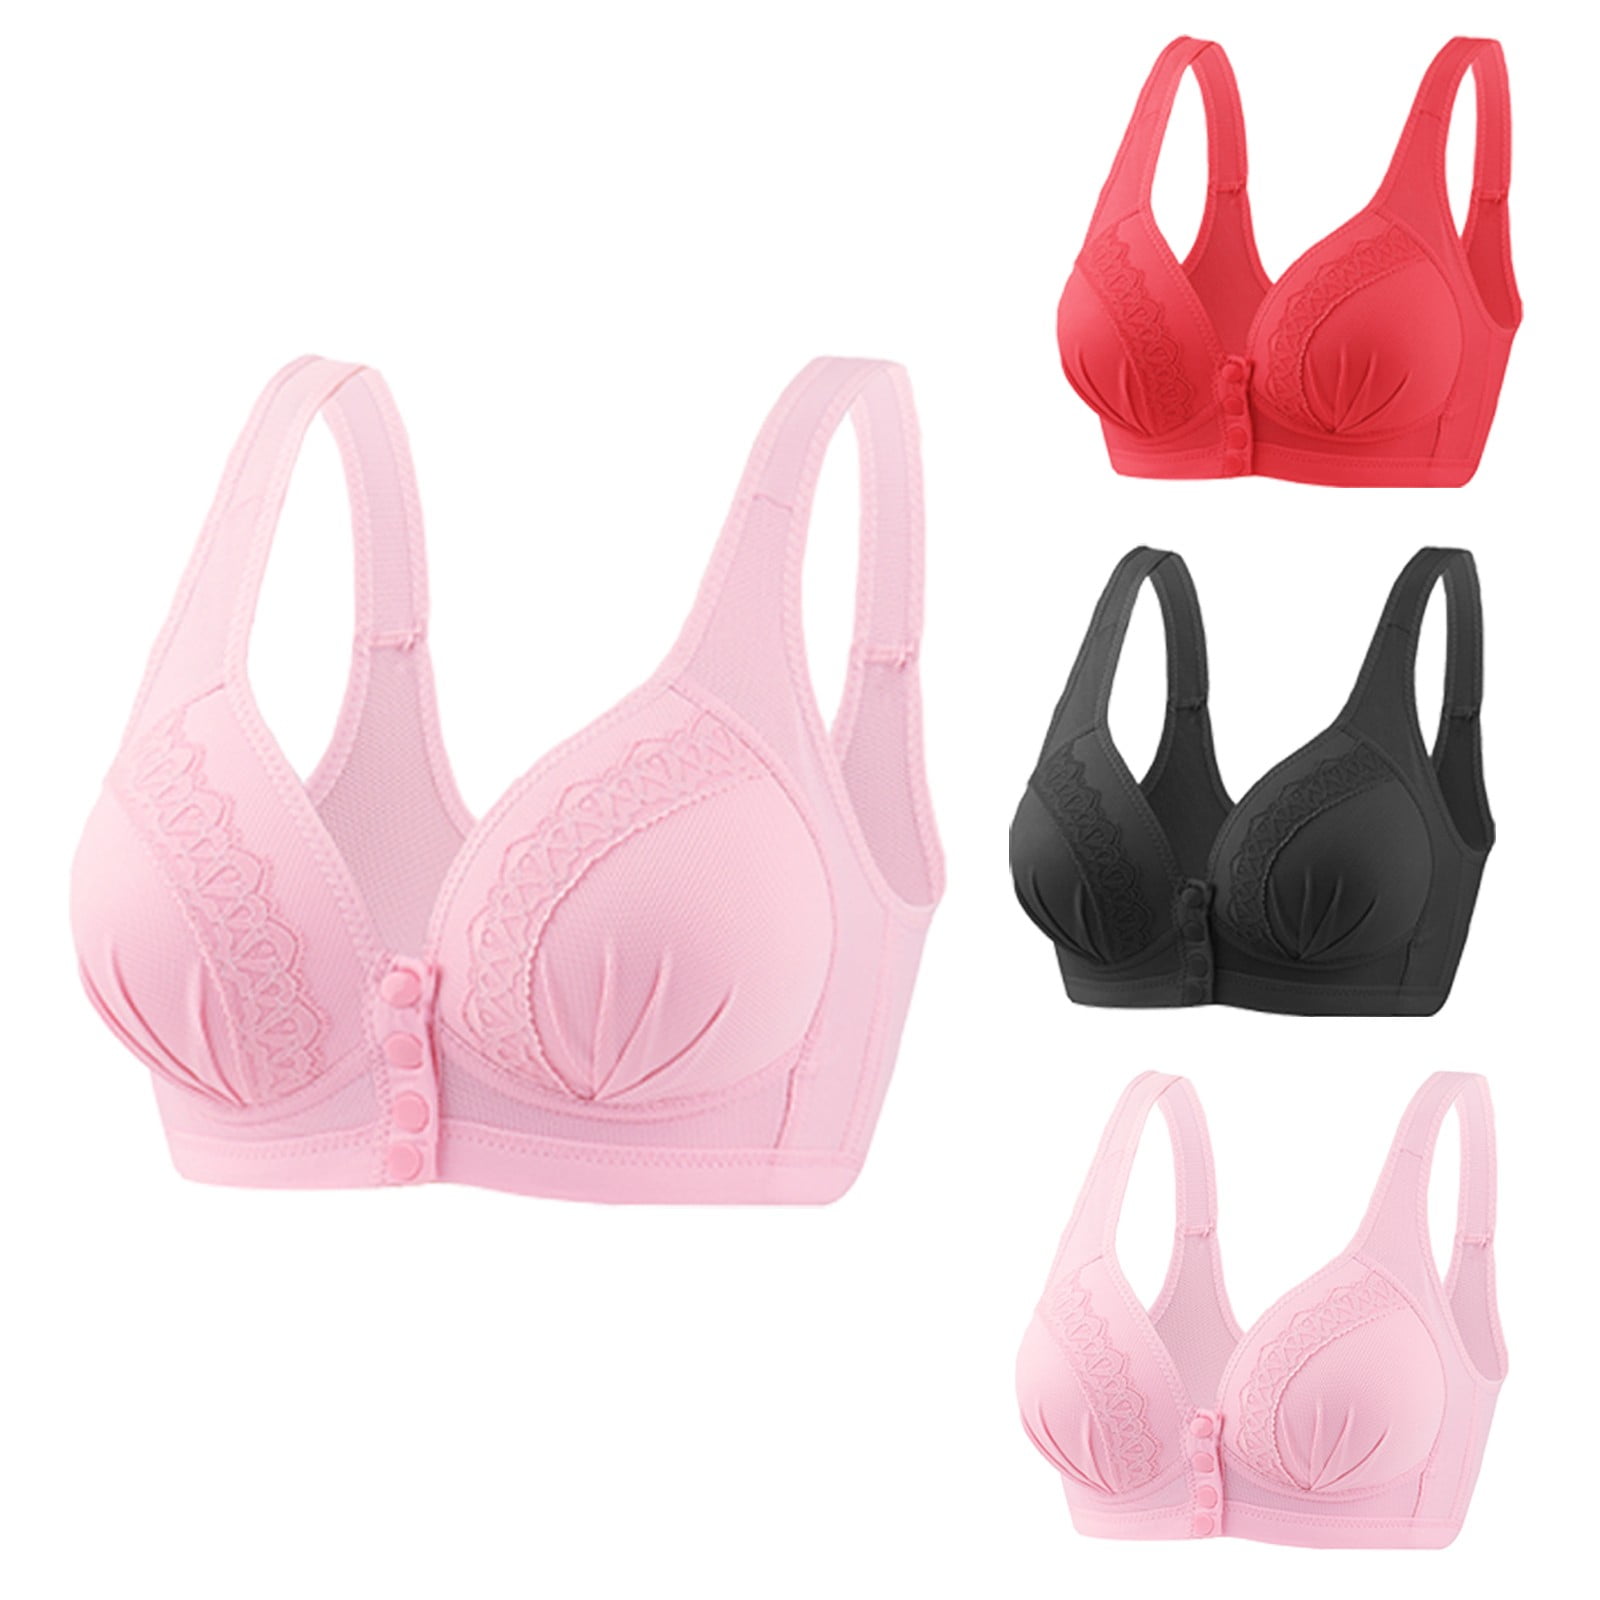 Daisy Bra, Charm Bras Front Snaps Seniors, Daisy Bra for Women, Full  Coverage Easy Close Sports Bras (Pink, 38/85) at  Women's Clothing  store